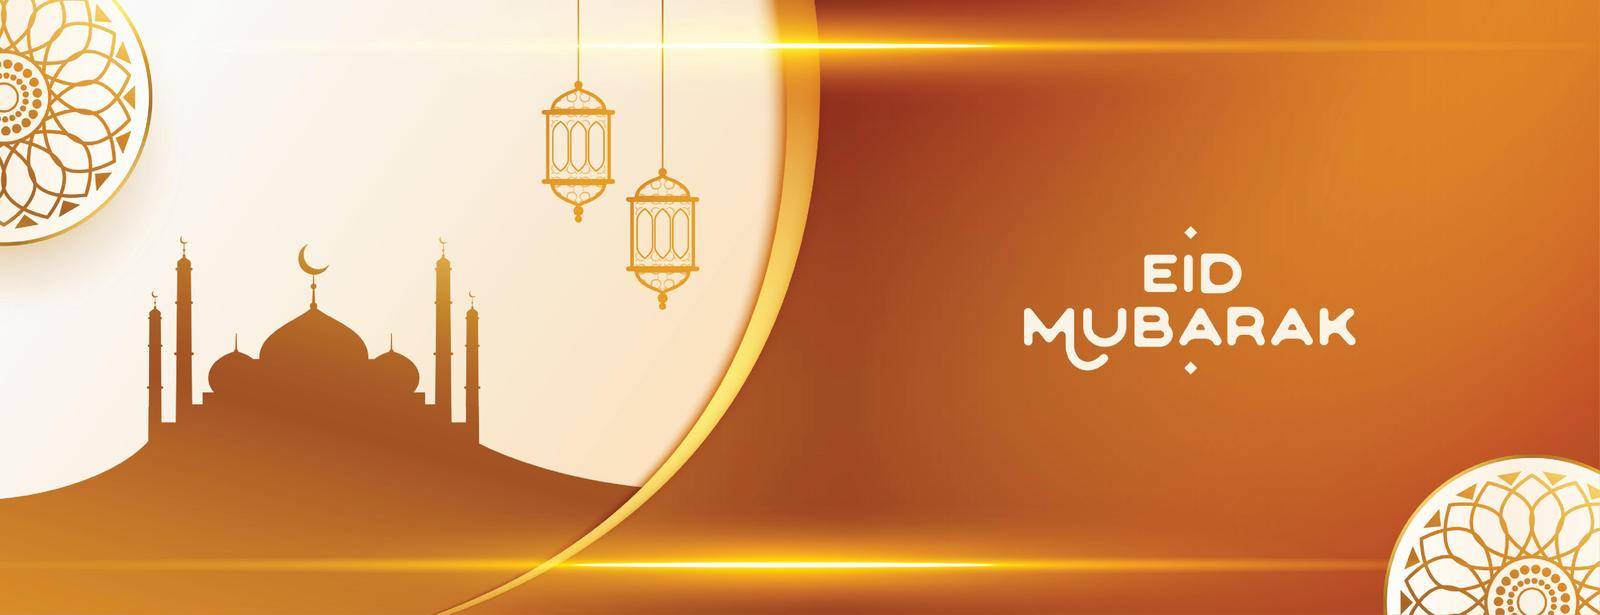 eid mubarak banner with shiny lights mosque and lanterns